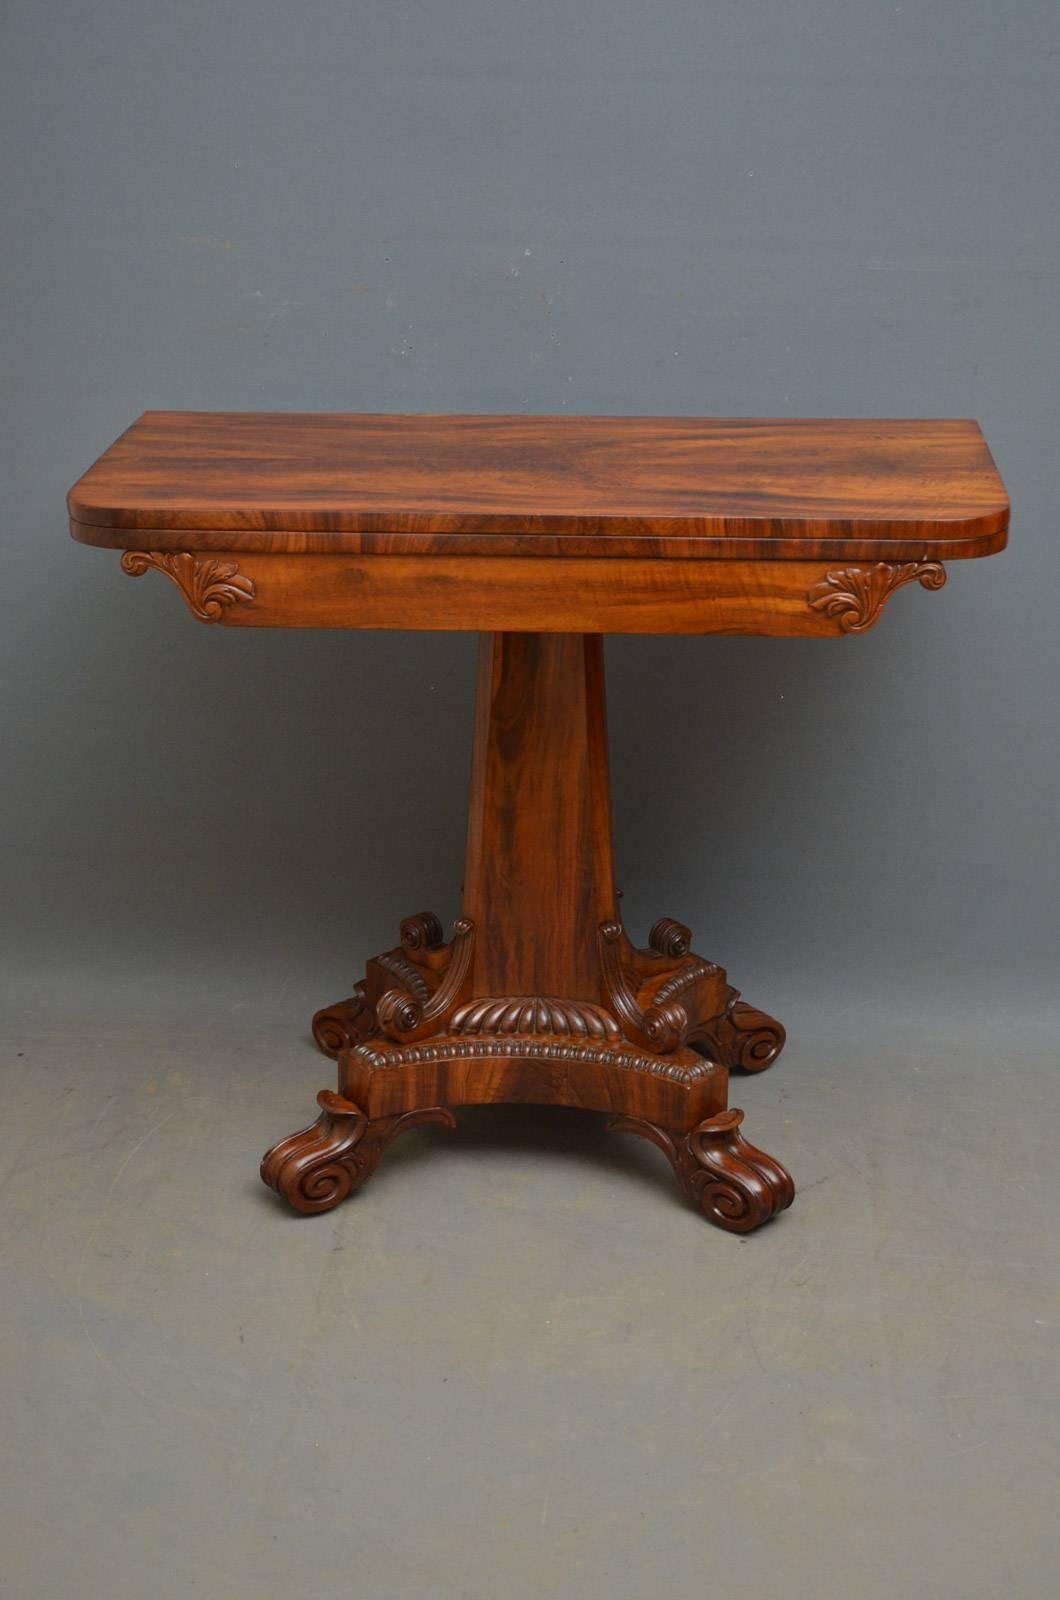 Sn4202 fine quality and very rare William IV card table in goncalo alves, having exceptional grain to the top which opens to reveal green baize interior above carved frieze, standing on elegant column and carved base with fluted decoration